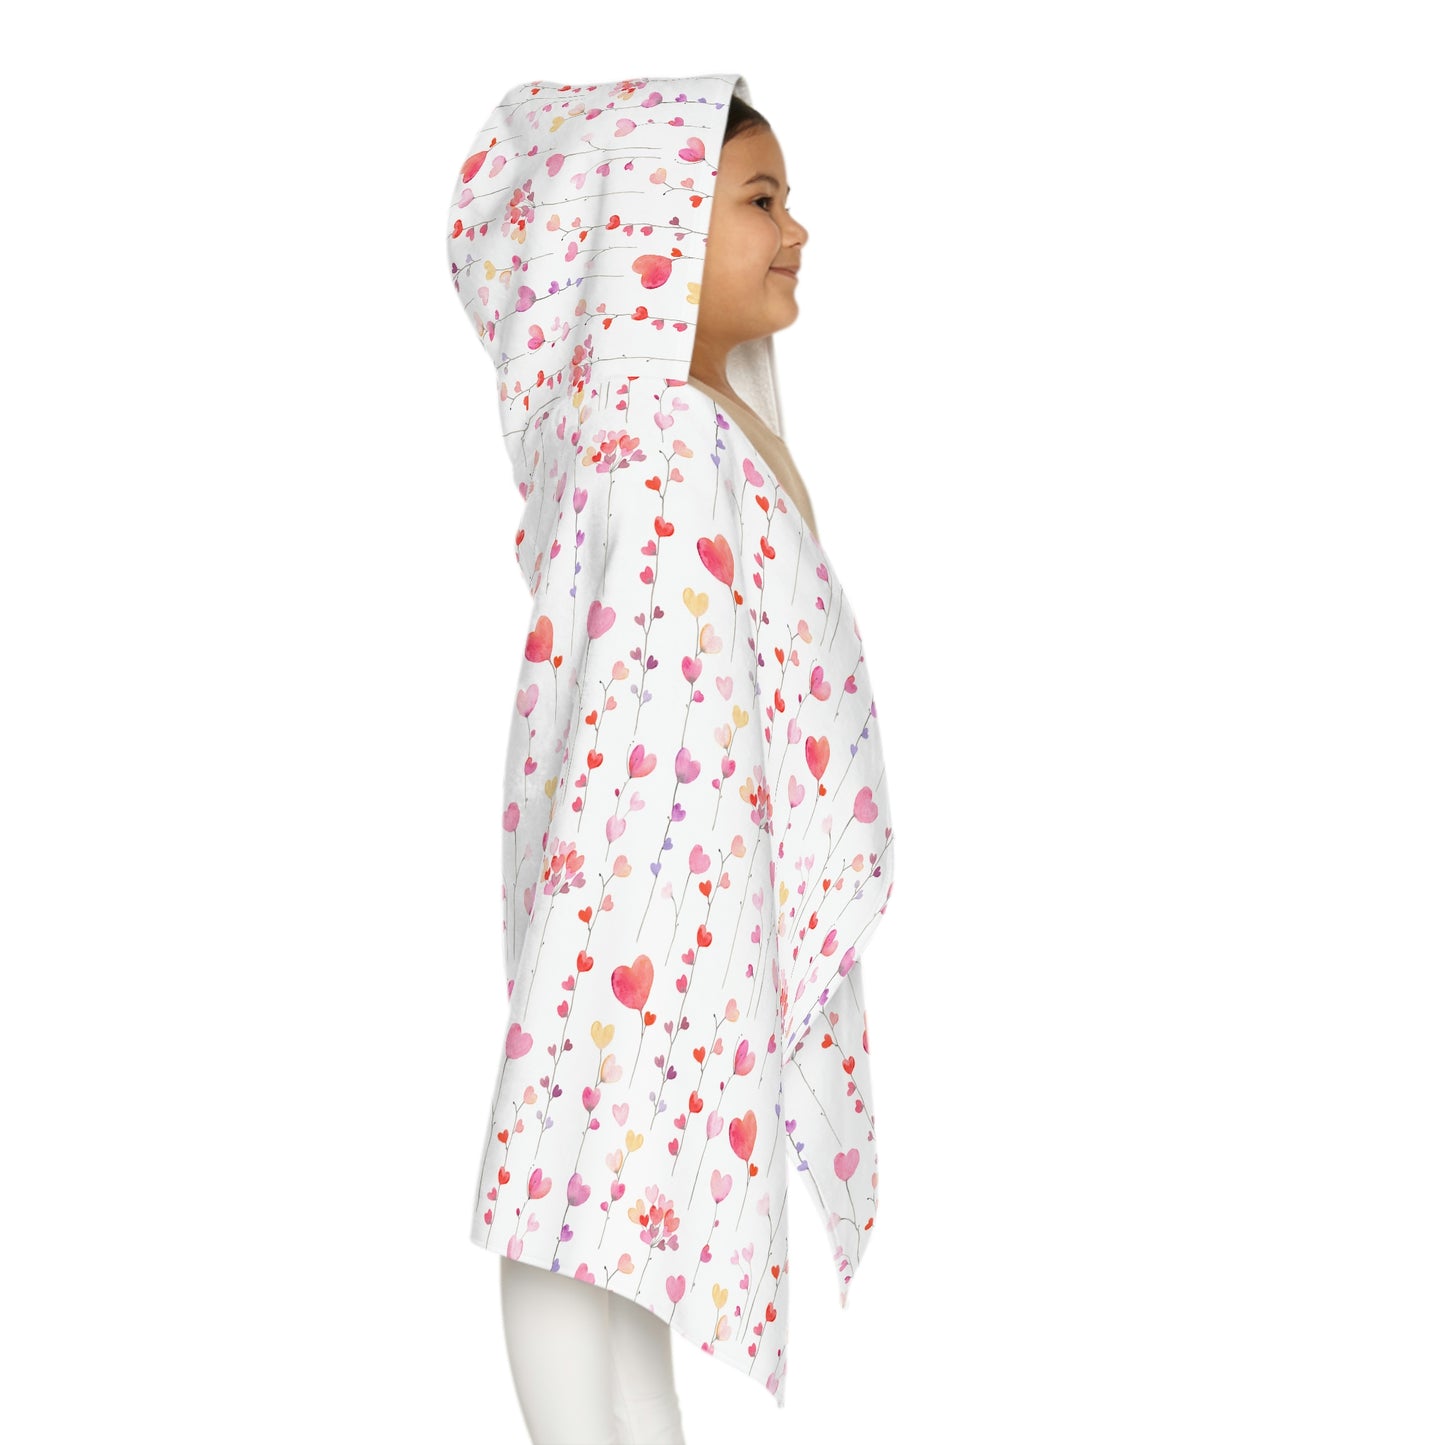 Heart Flowers Youth Hooded Towel